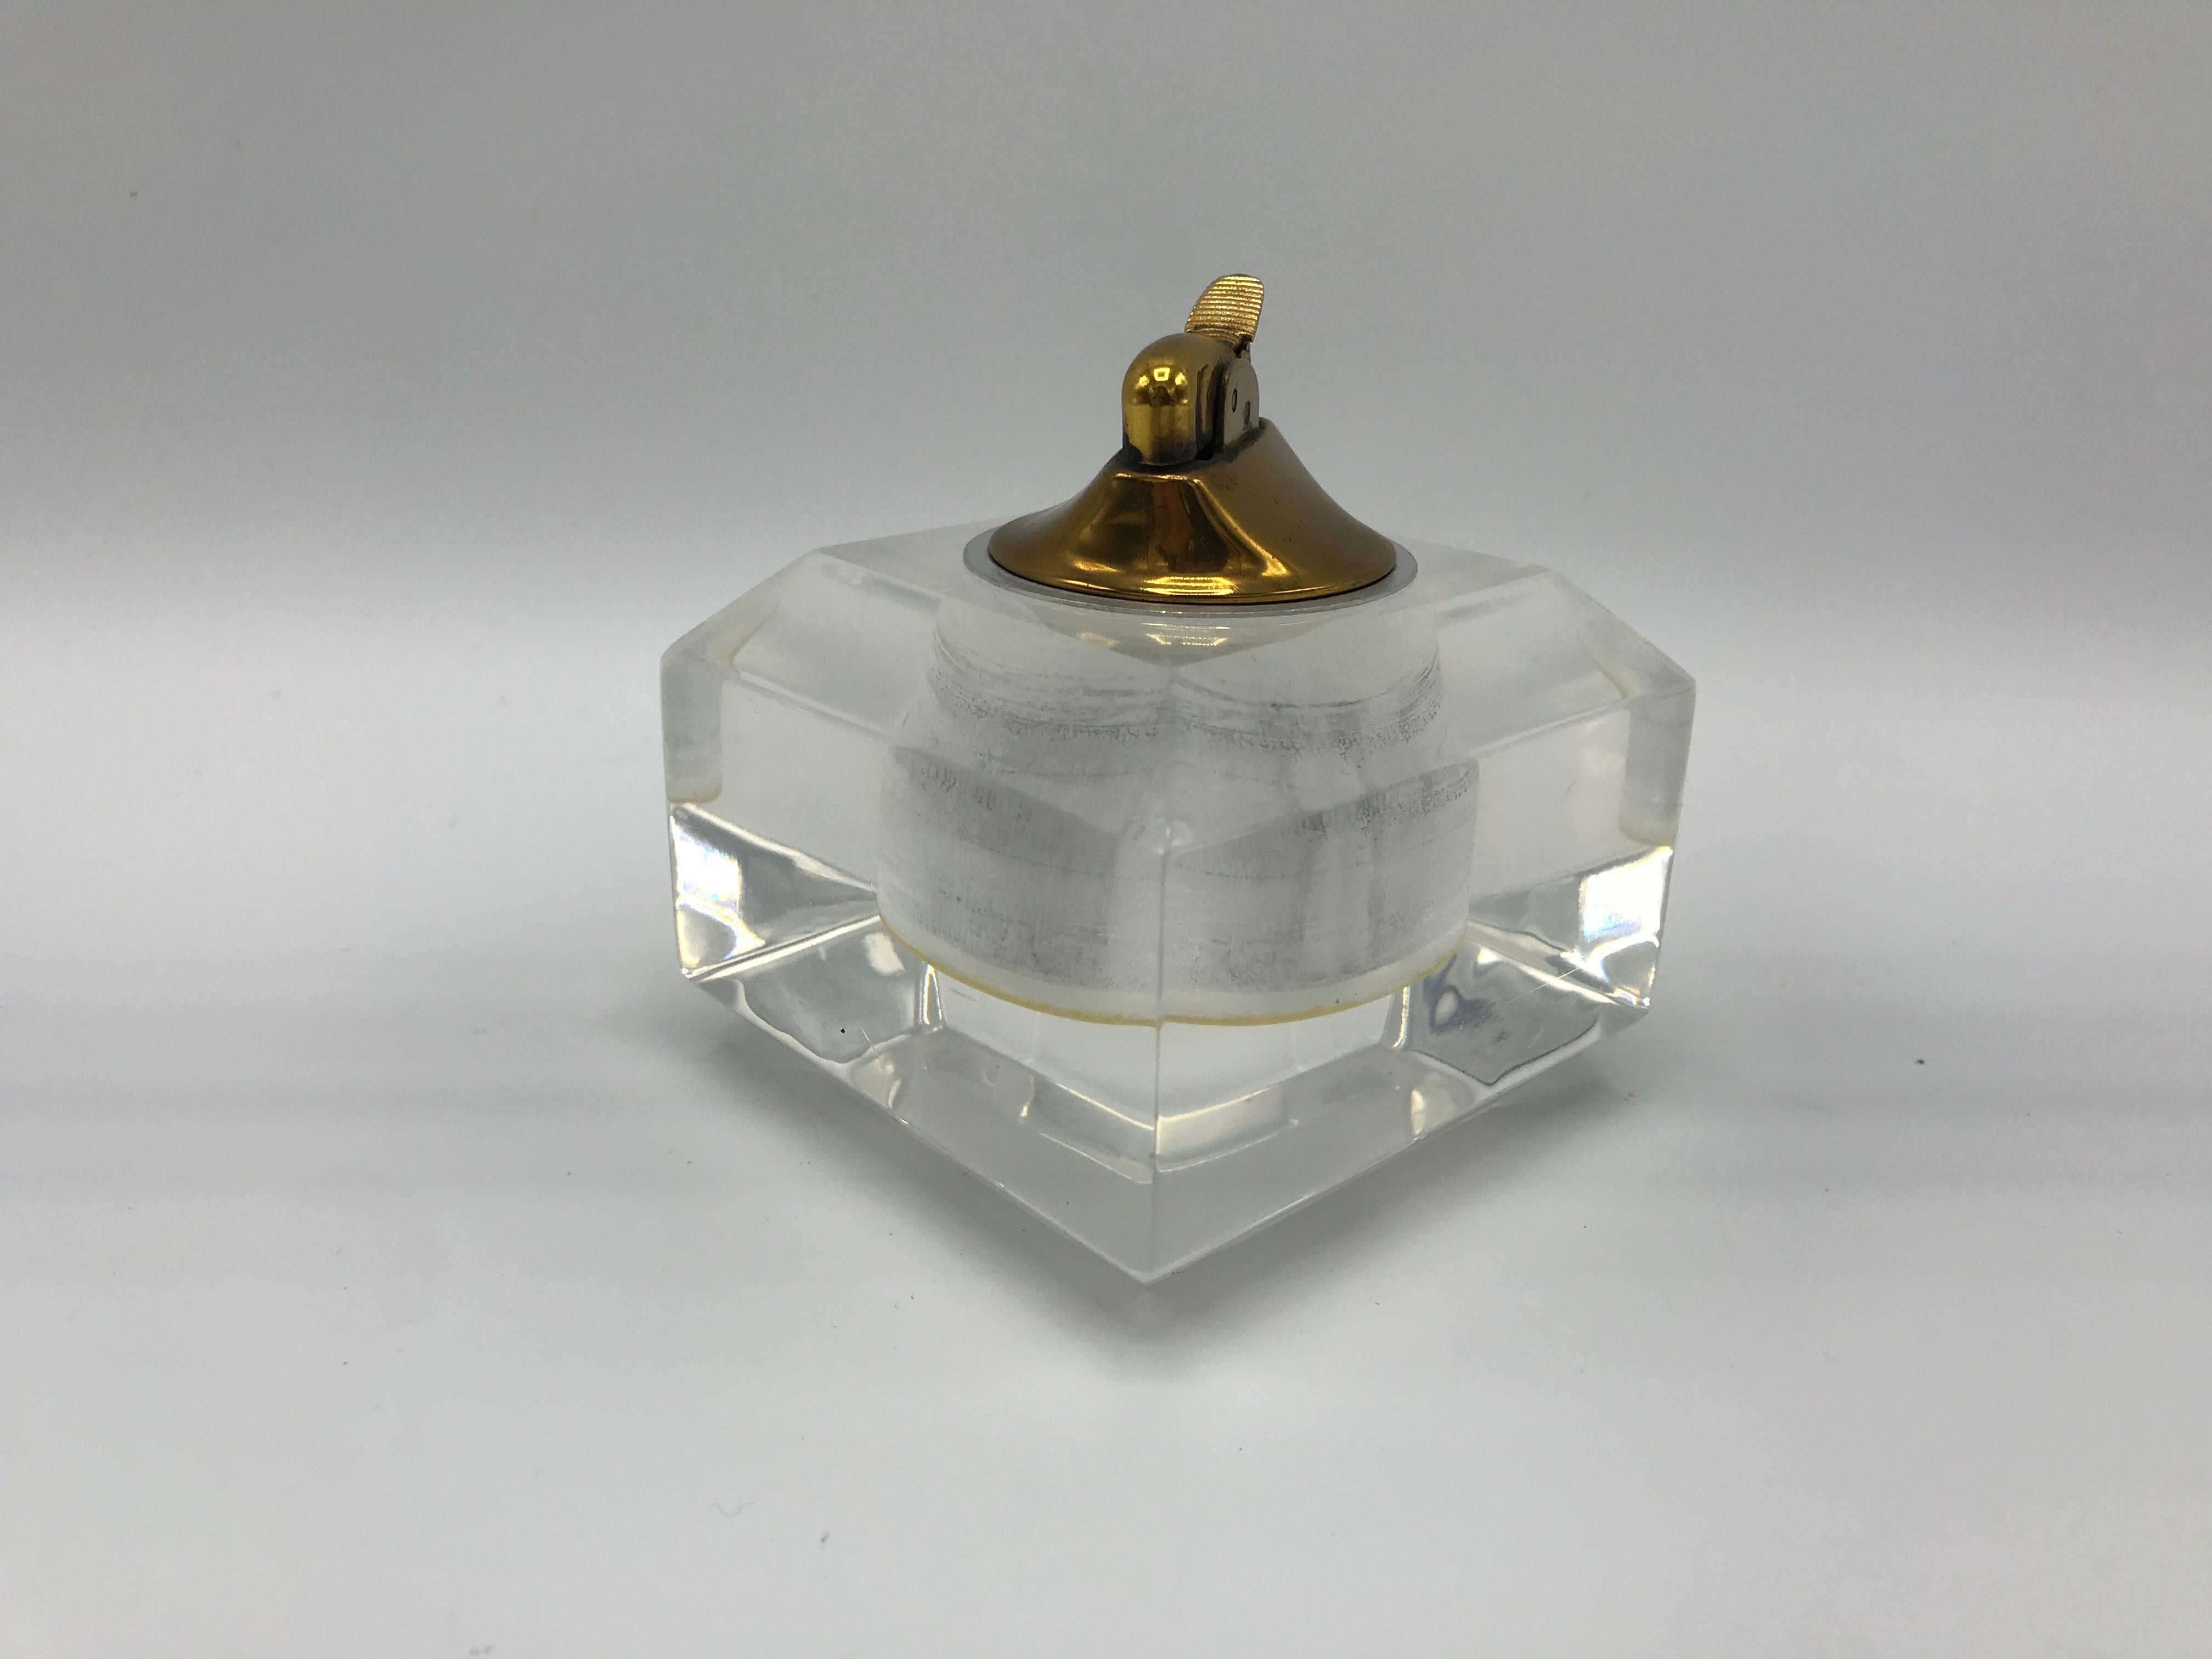 Offered is a fabulous, 1980s Lucite tabletop lighter. The piece has a brass-tone metal lighter mechanism, that is easily removable from the Lucite base for lighter-fluid refills. Heavy.